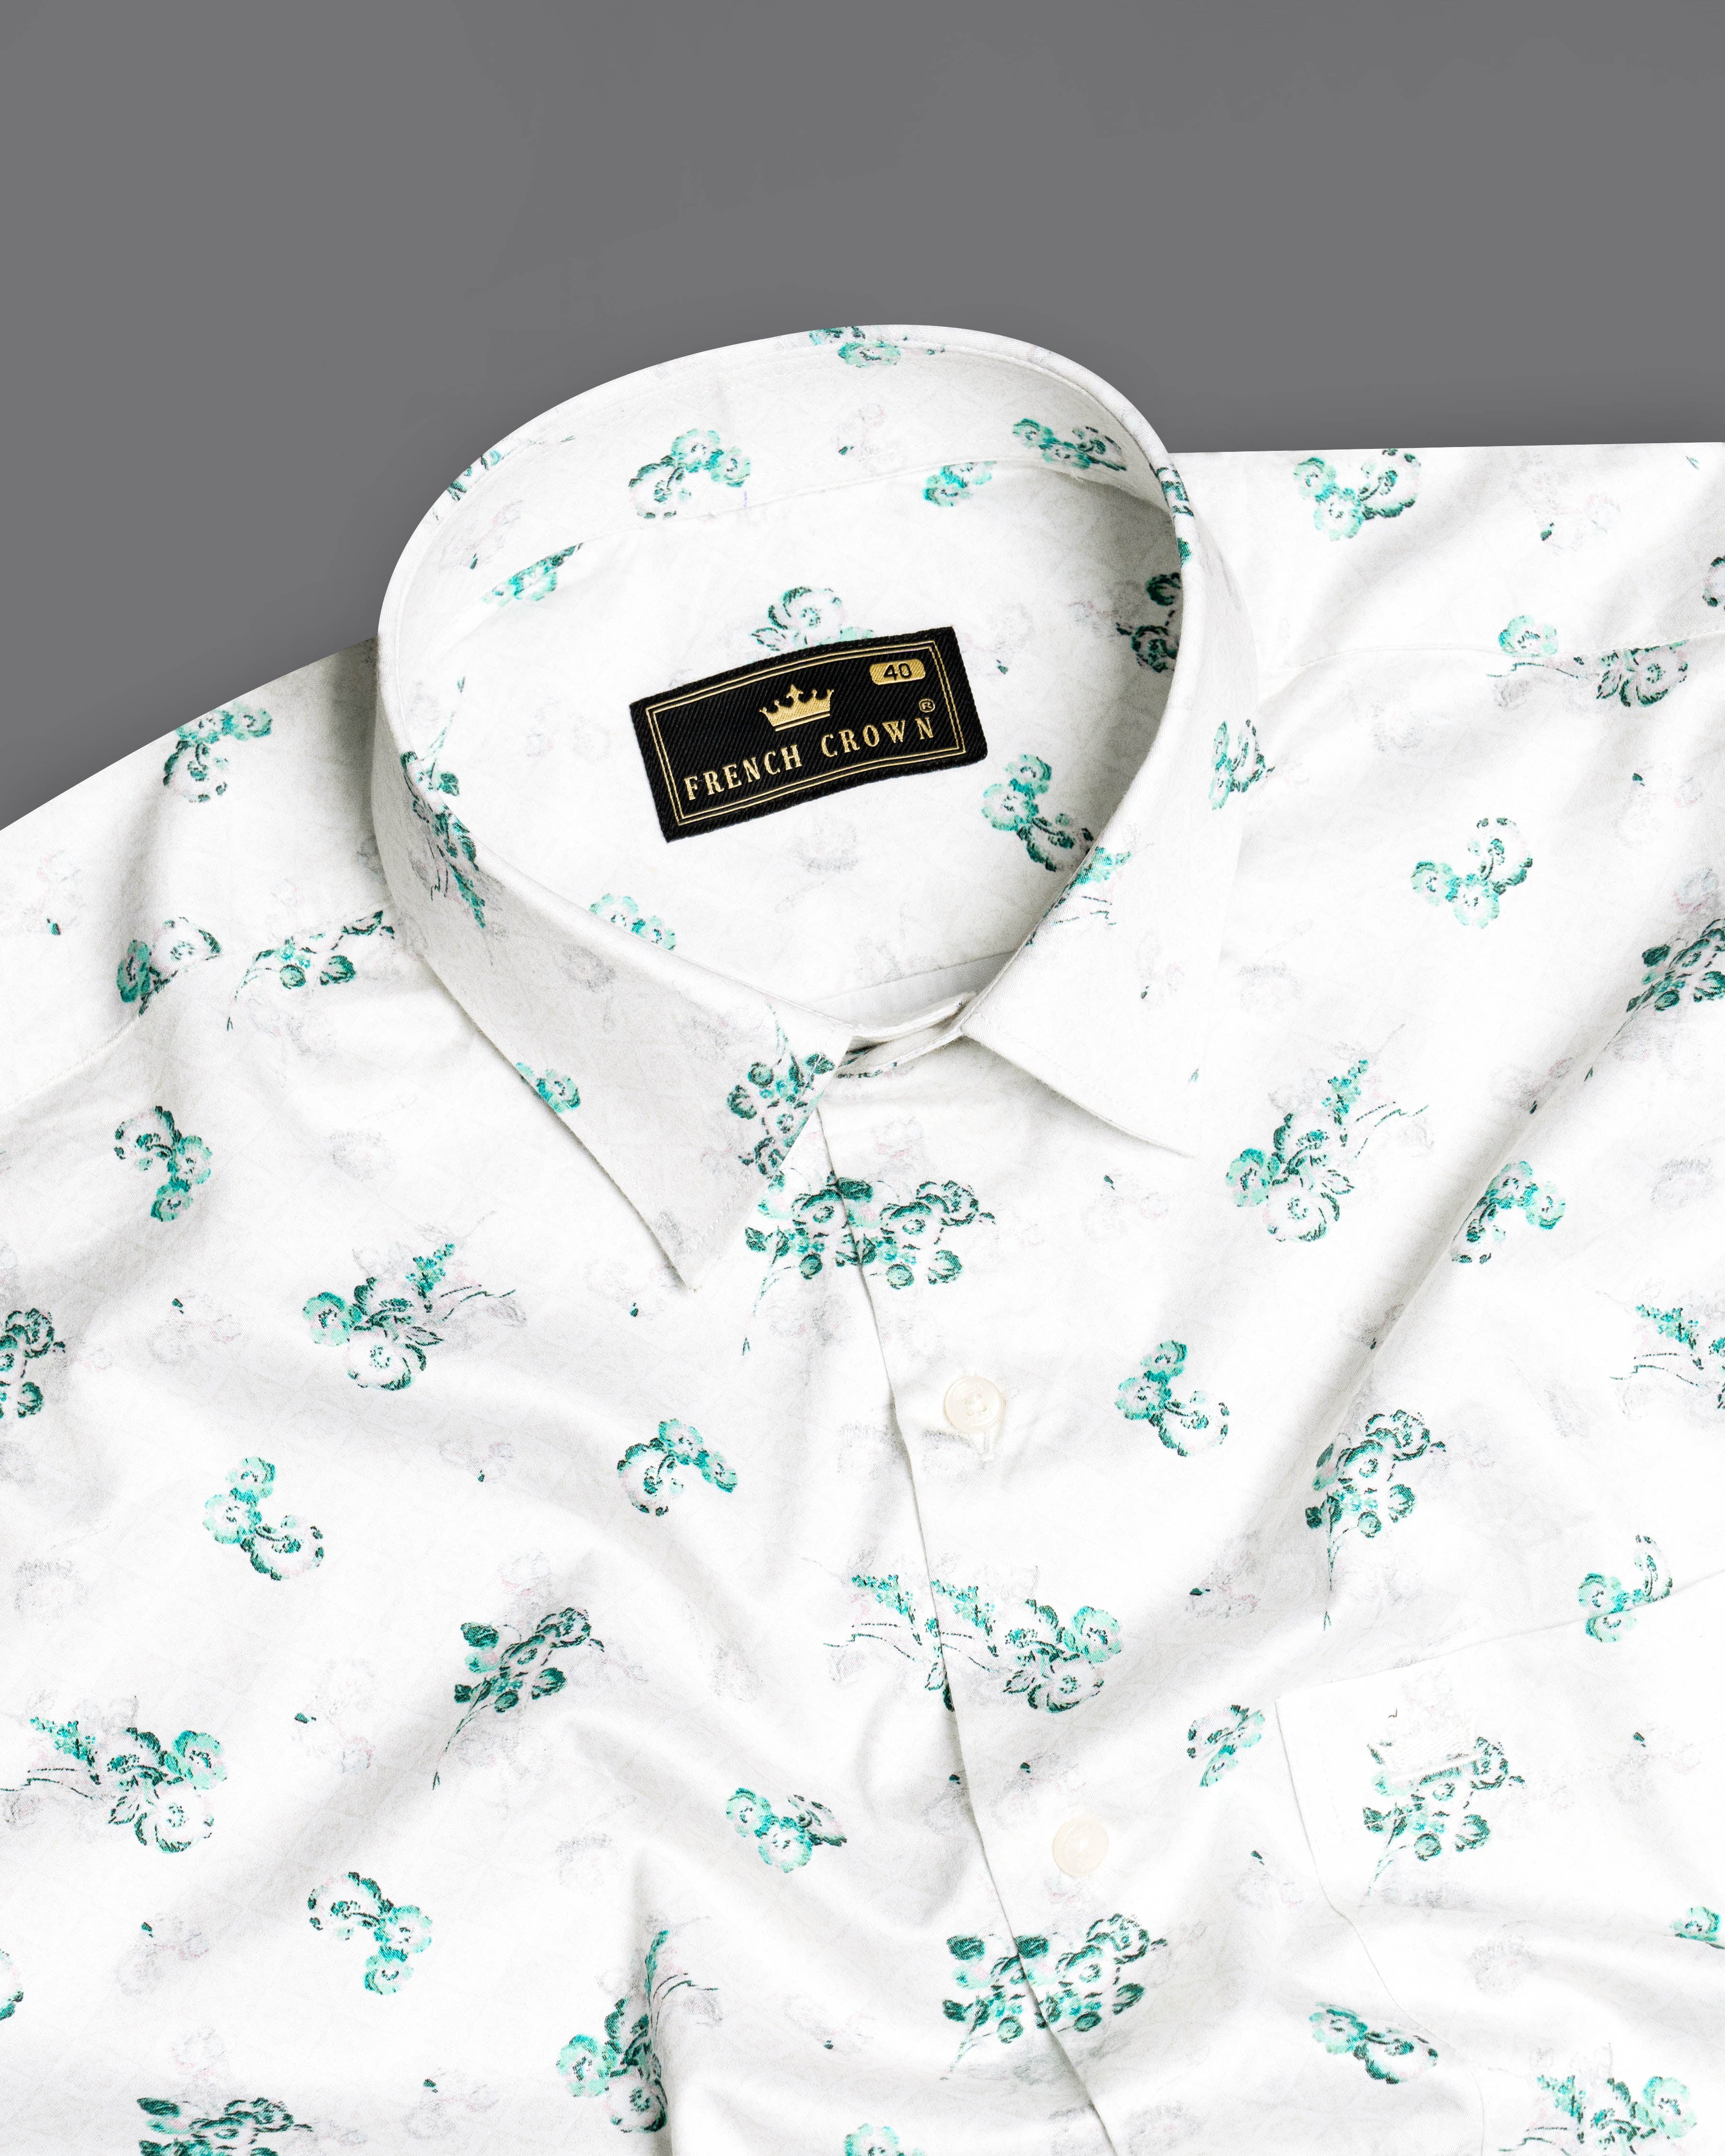 Bright White with Chinook Green Ditsy Printed Super Soft Premium Cotton Shirt 9529-38, 9529-H-38, 9529-39, 9529-H-39, 9529-40, 9529-H-40, 9529-42, 9529-H-42, 9529-44, 9529-H-44, 9529-46, 9529-H-46, 9529-48, 9529-H-48, 9529-50, 9529-H-50, 9529-52, 9529-H-52